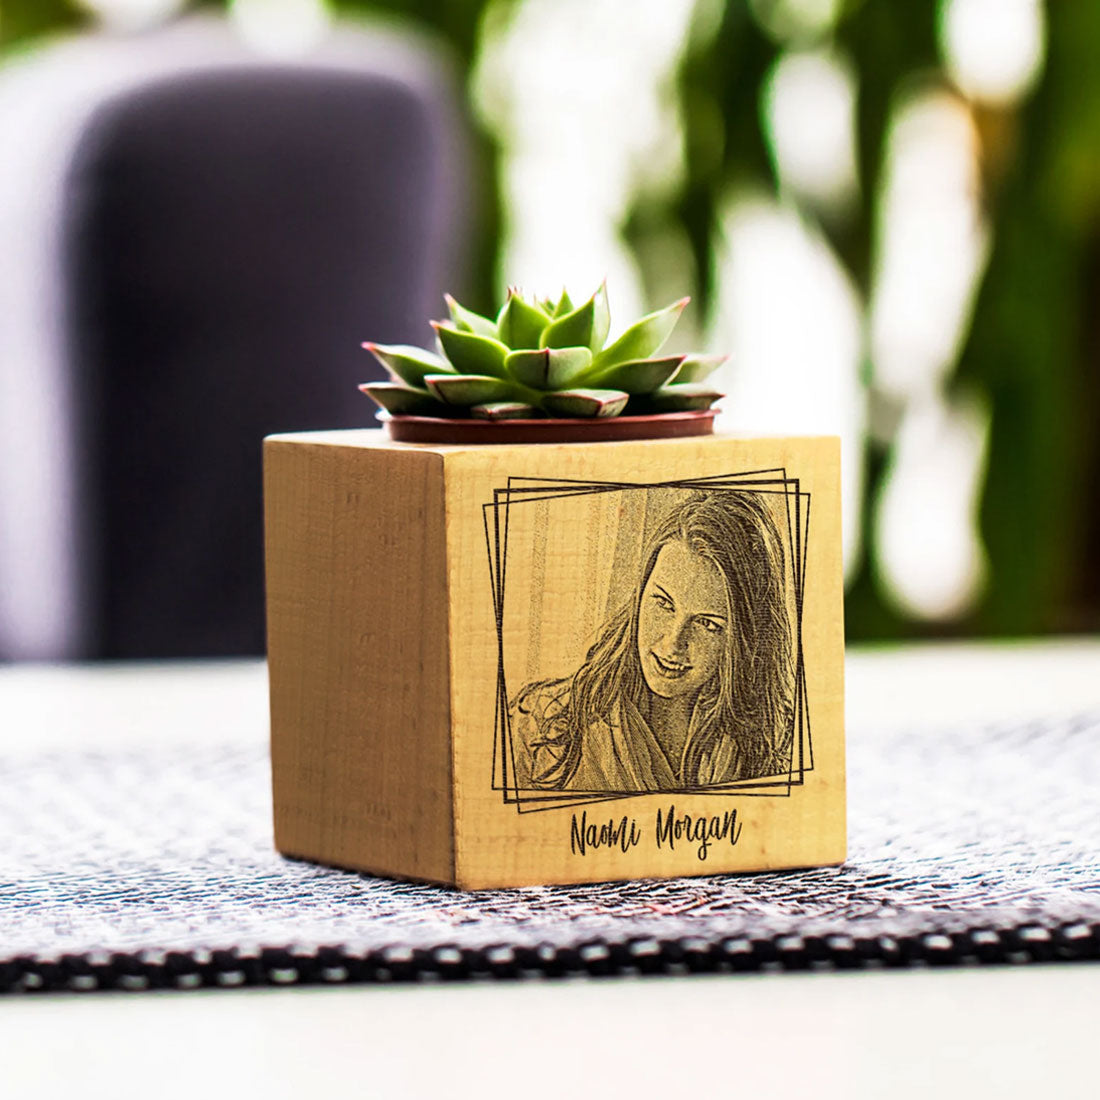 Personalized Pots with Engraved Photo